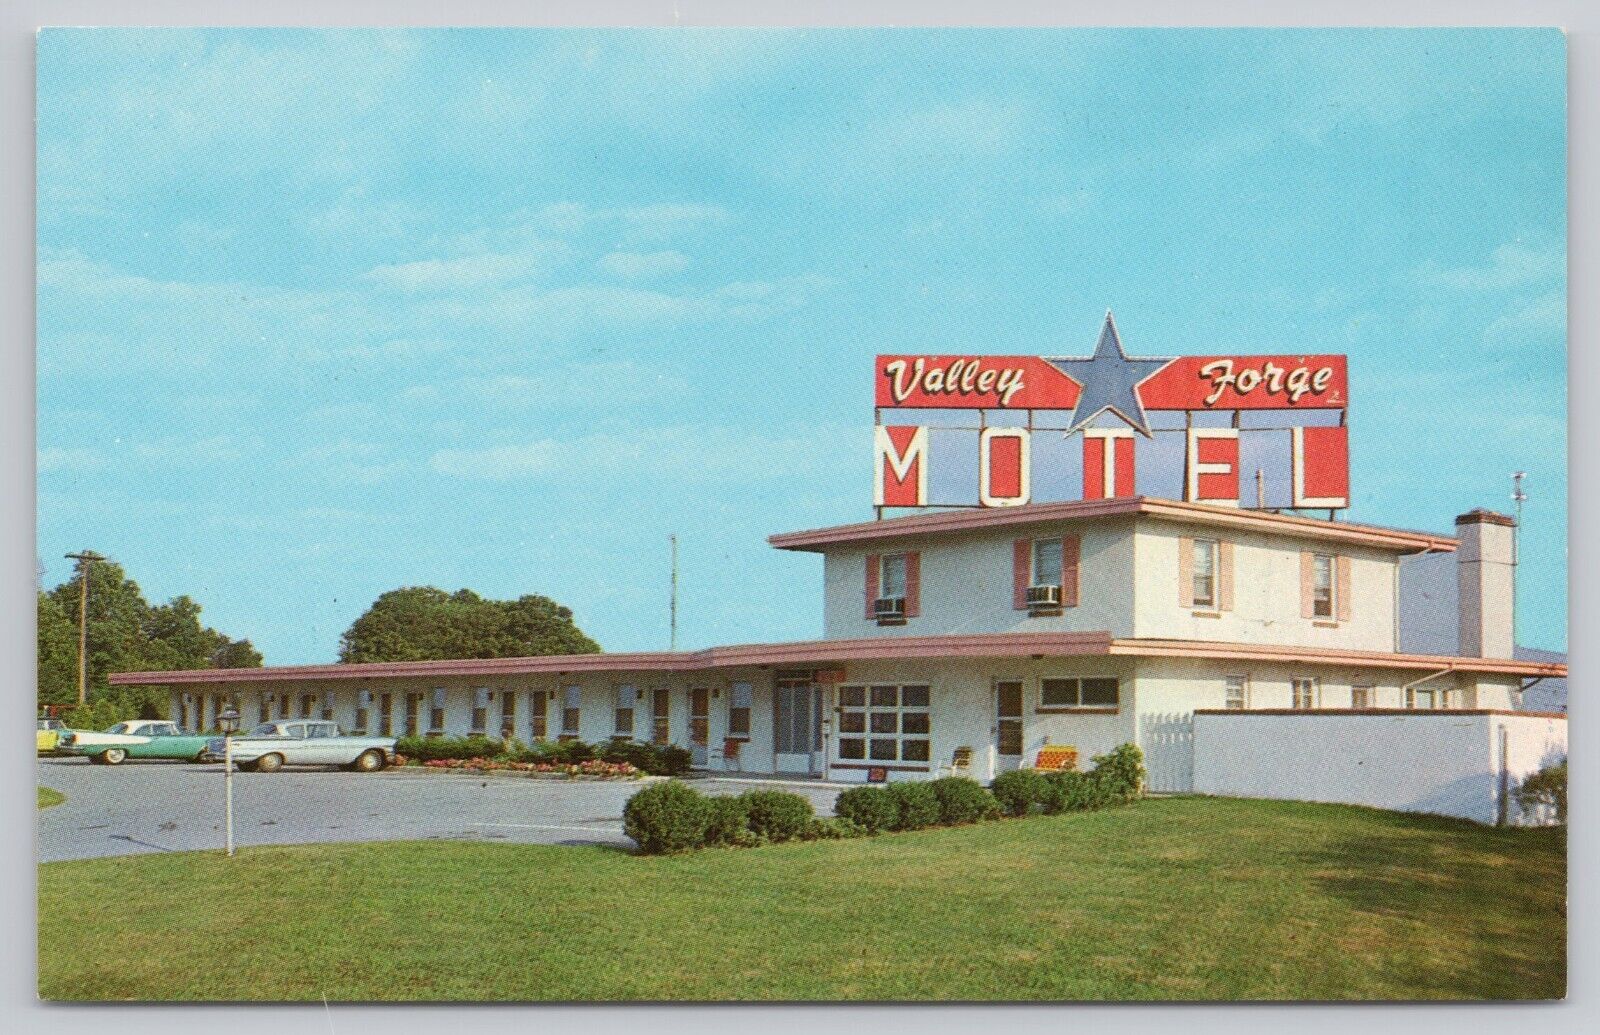 Downingtown Pennsylvania, Valley Forge Motel Advertising Old Sign, VTG Postcard